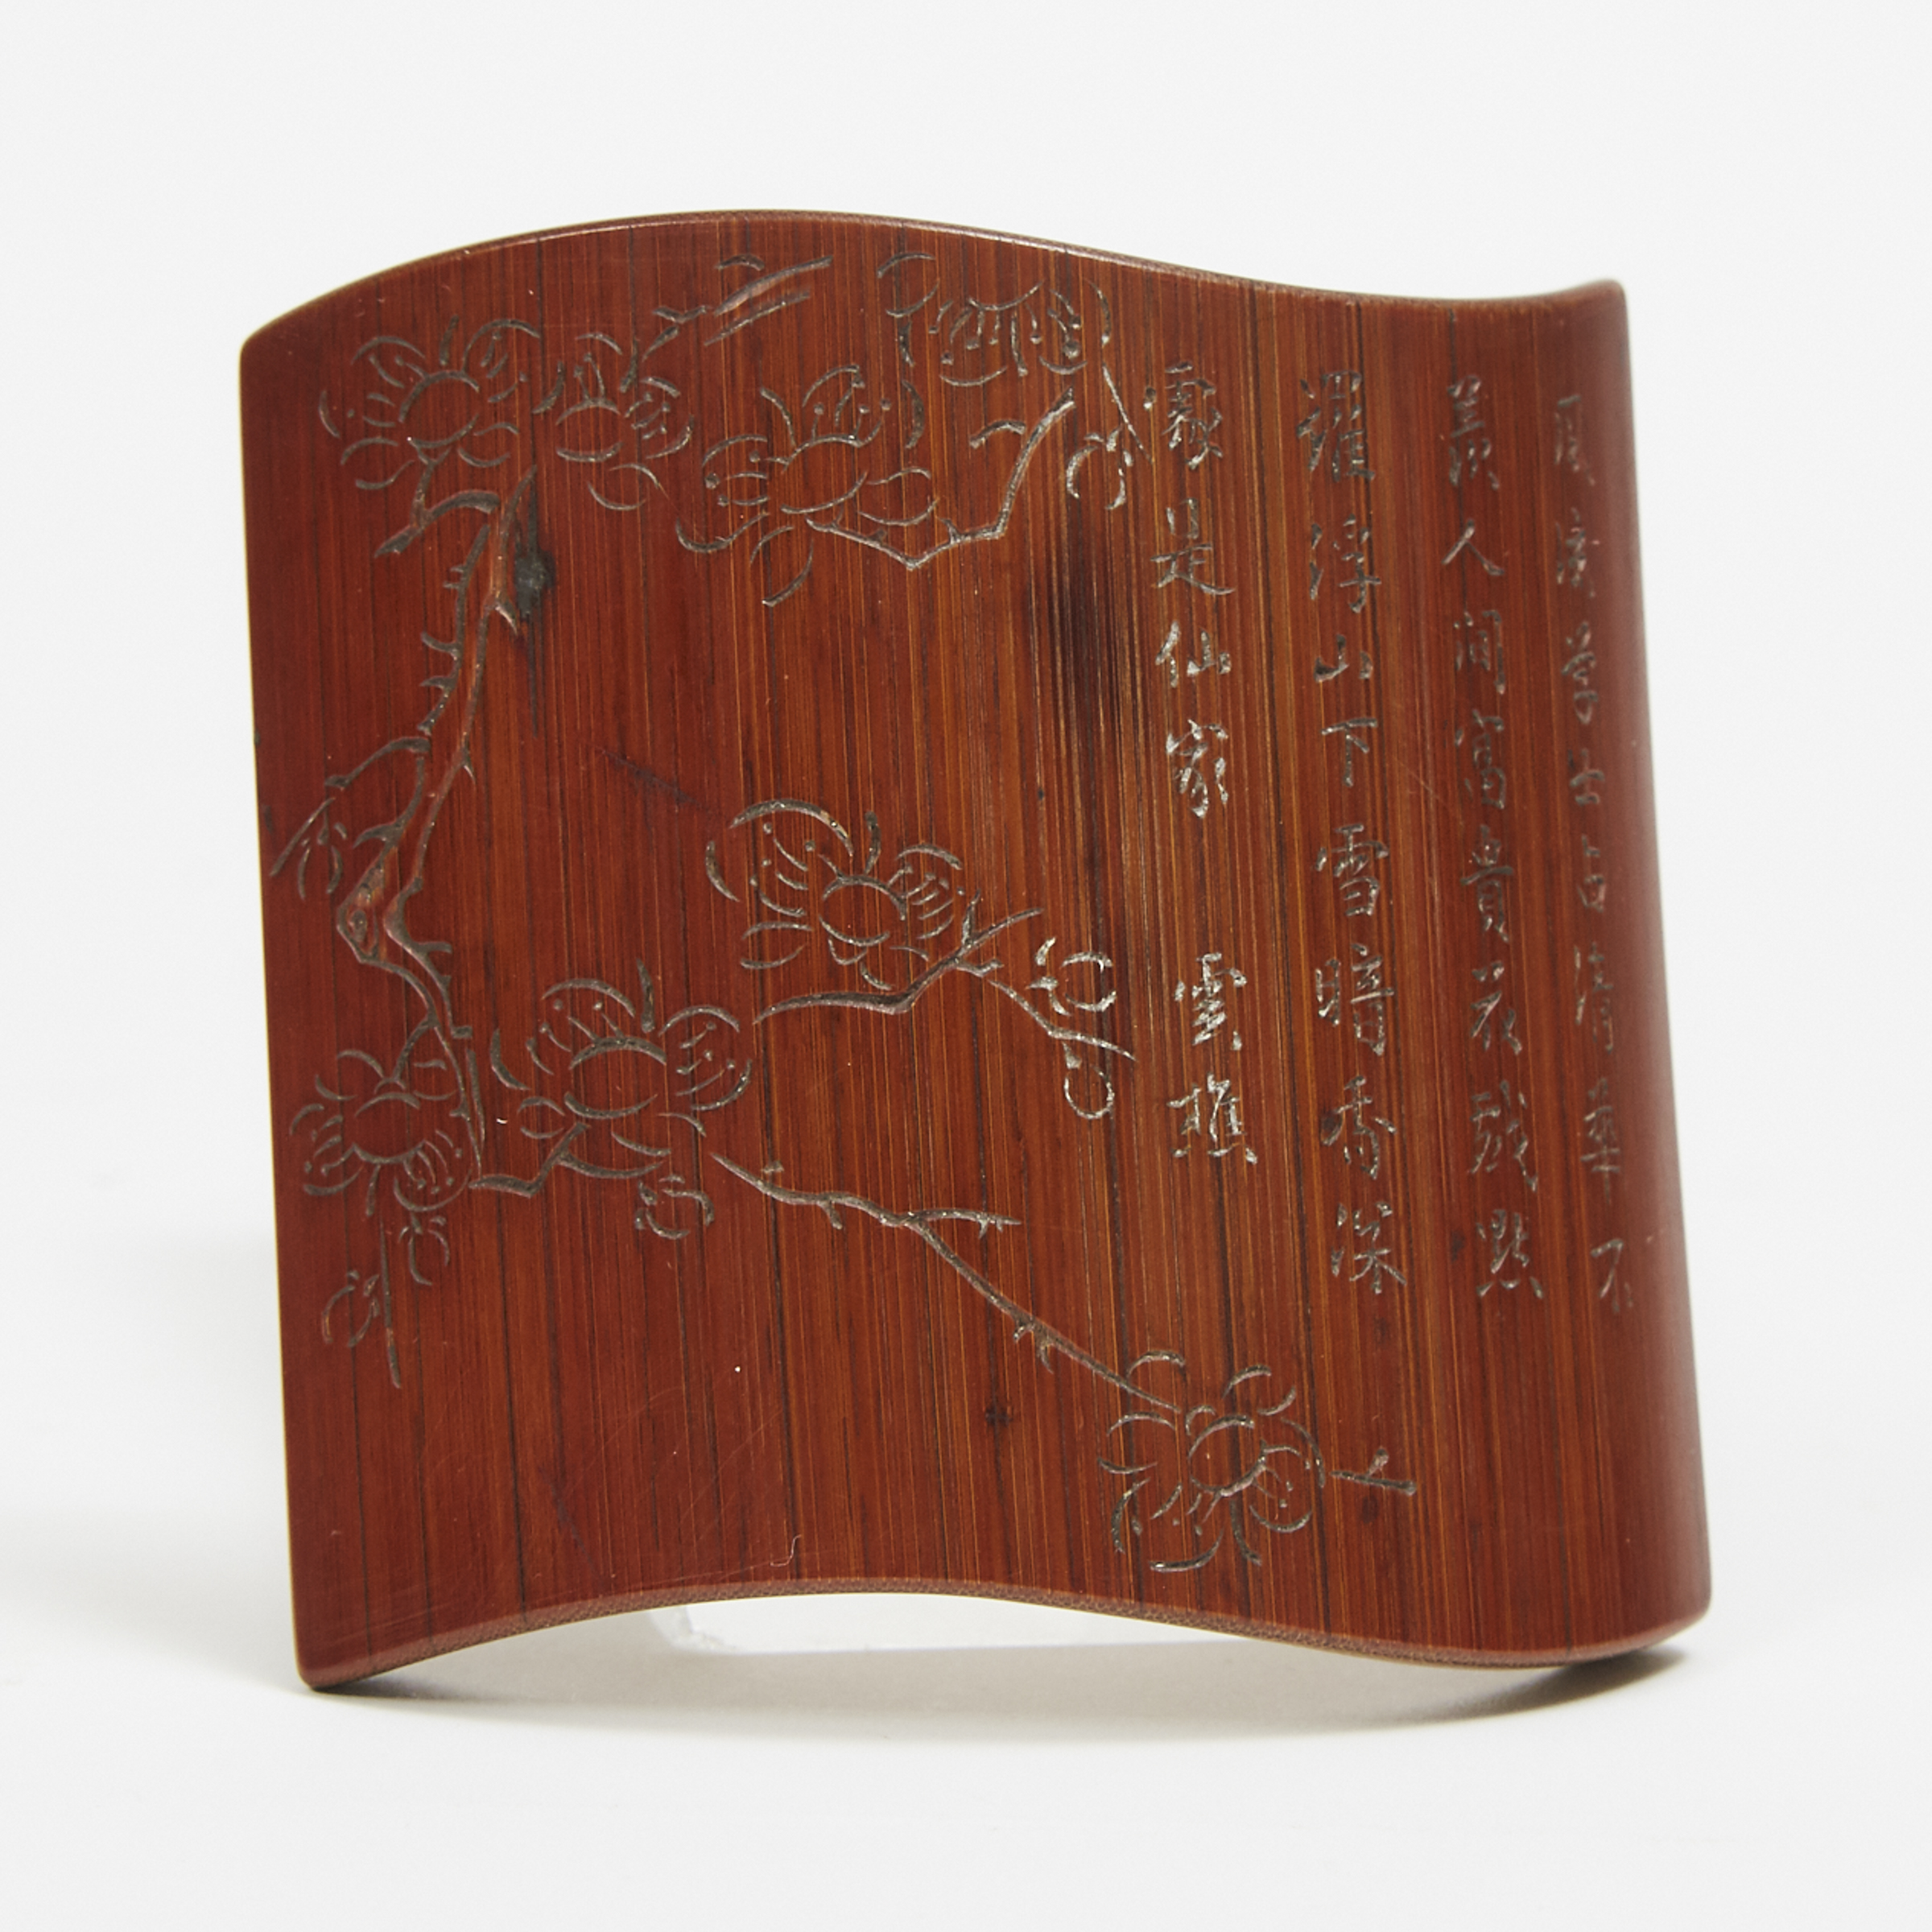 An Incised Bamboo Wrist Rest, Signed Dengwei